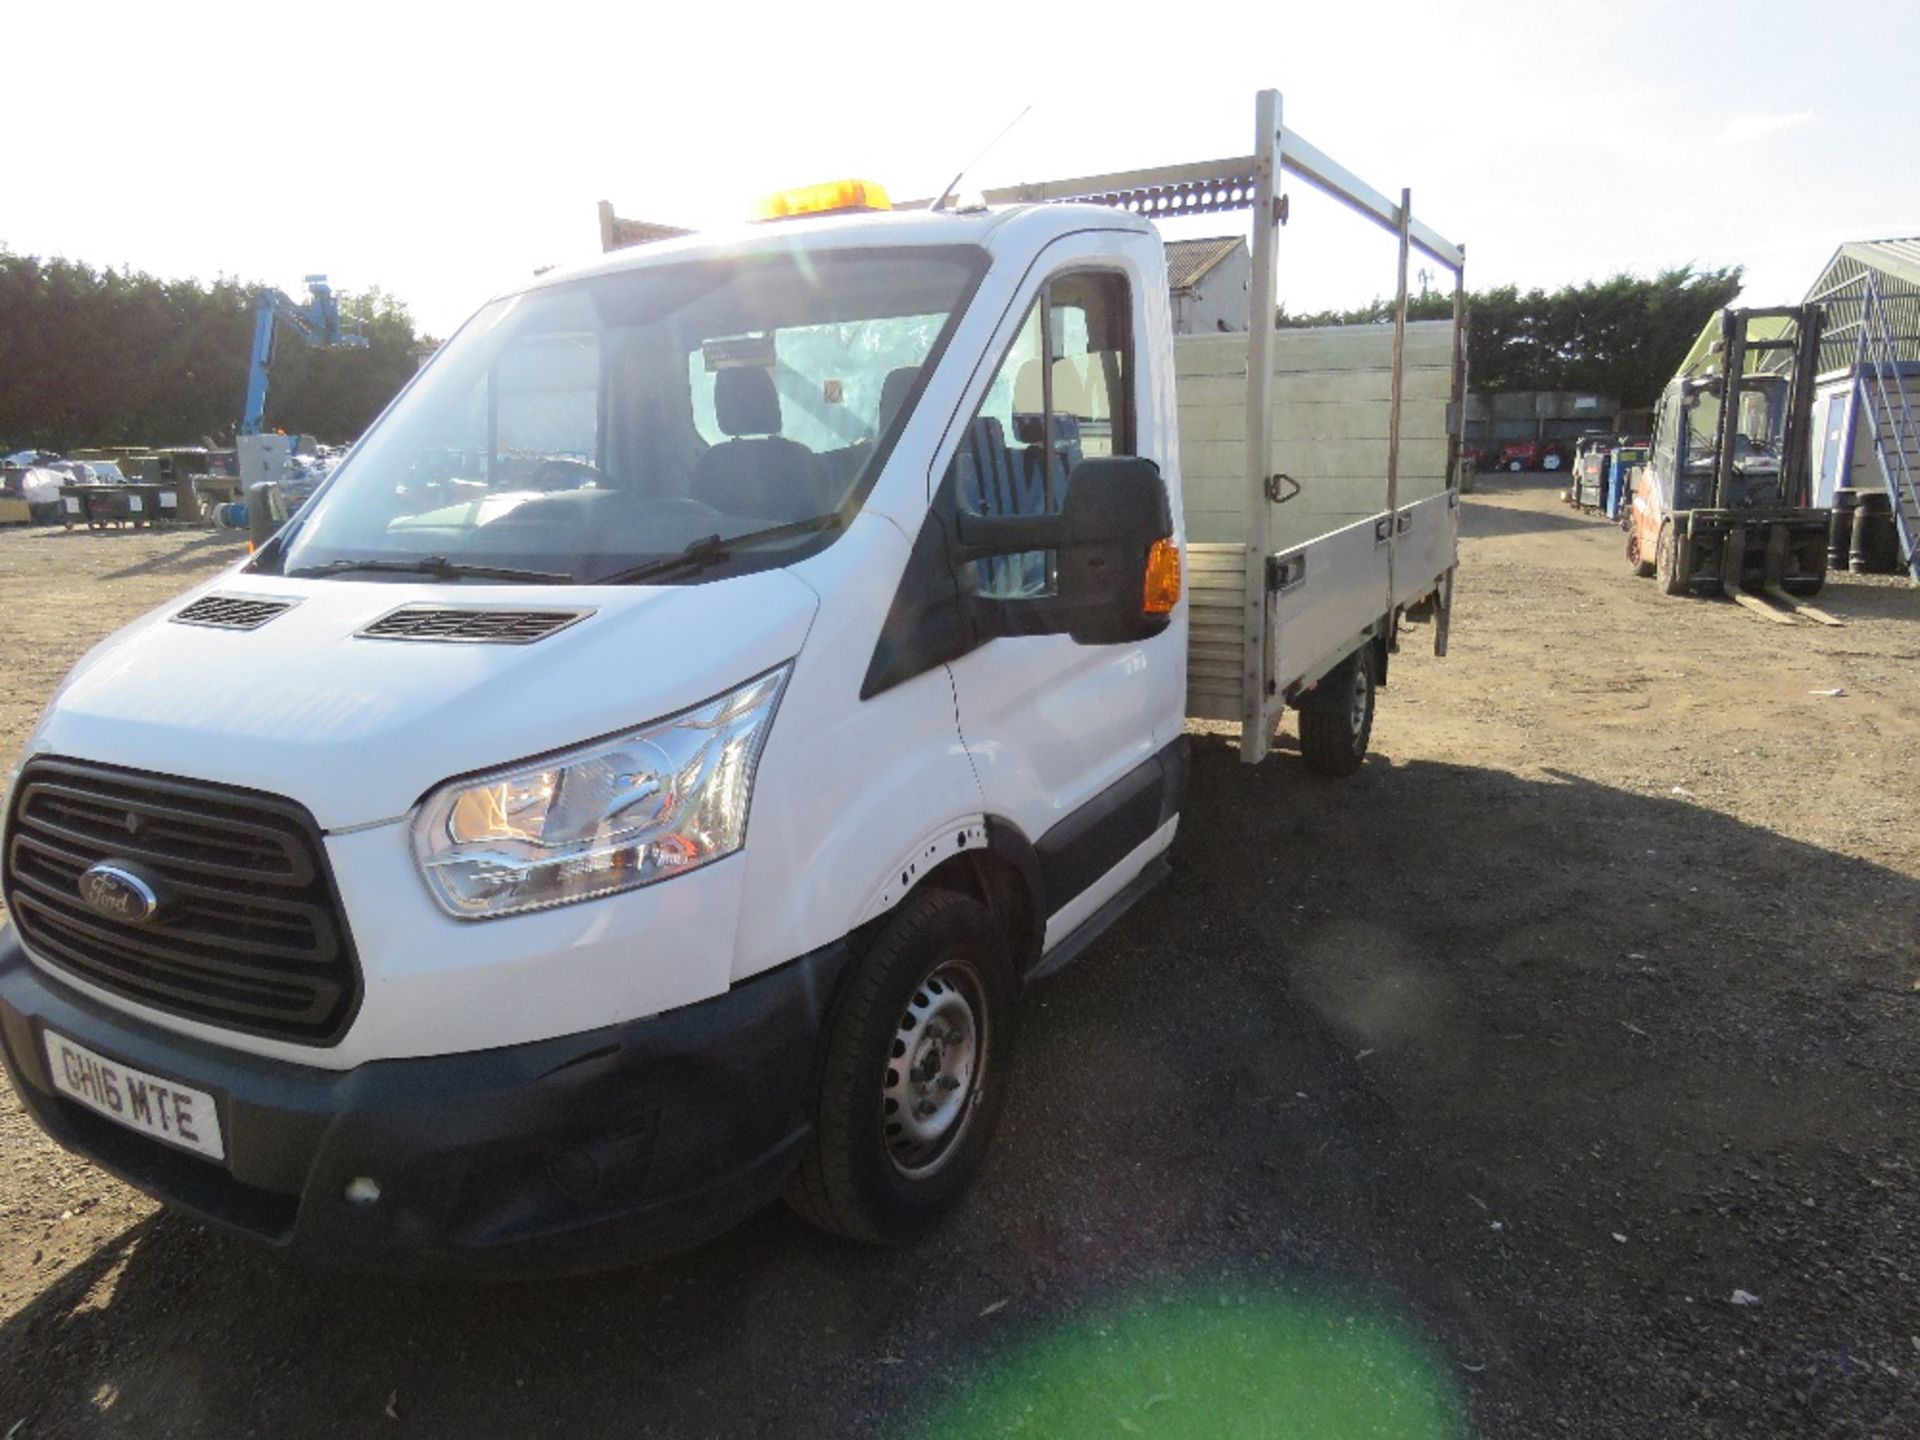 FORD TRANSIT 350 FLAT BED PICKUP TRUCK WITH REAR TAIL LIFT REG:GH16 MTE. WITH V5, OWNED BY VENDOR FR - Image 5 of 13